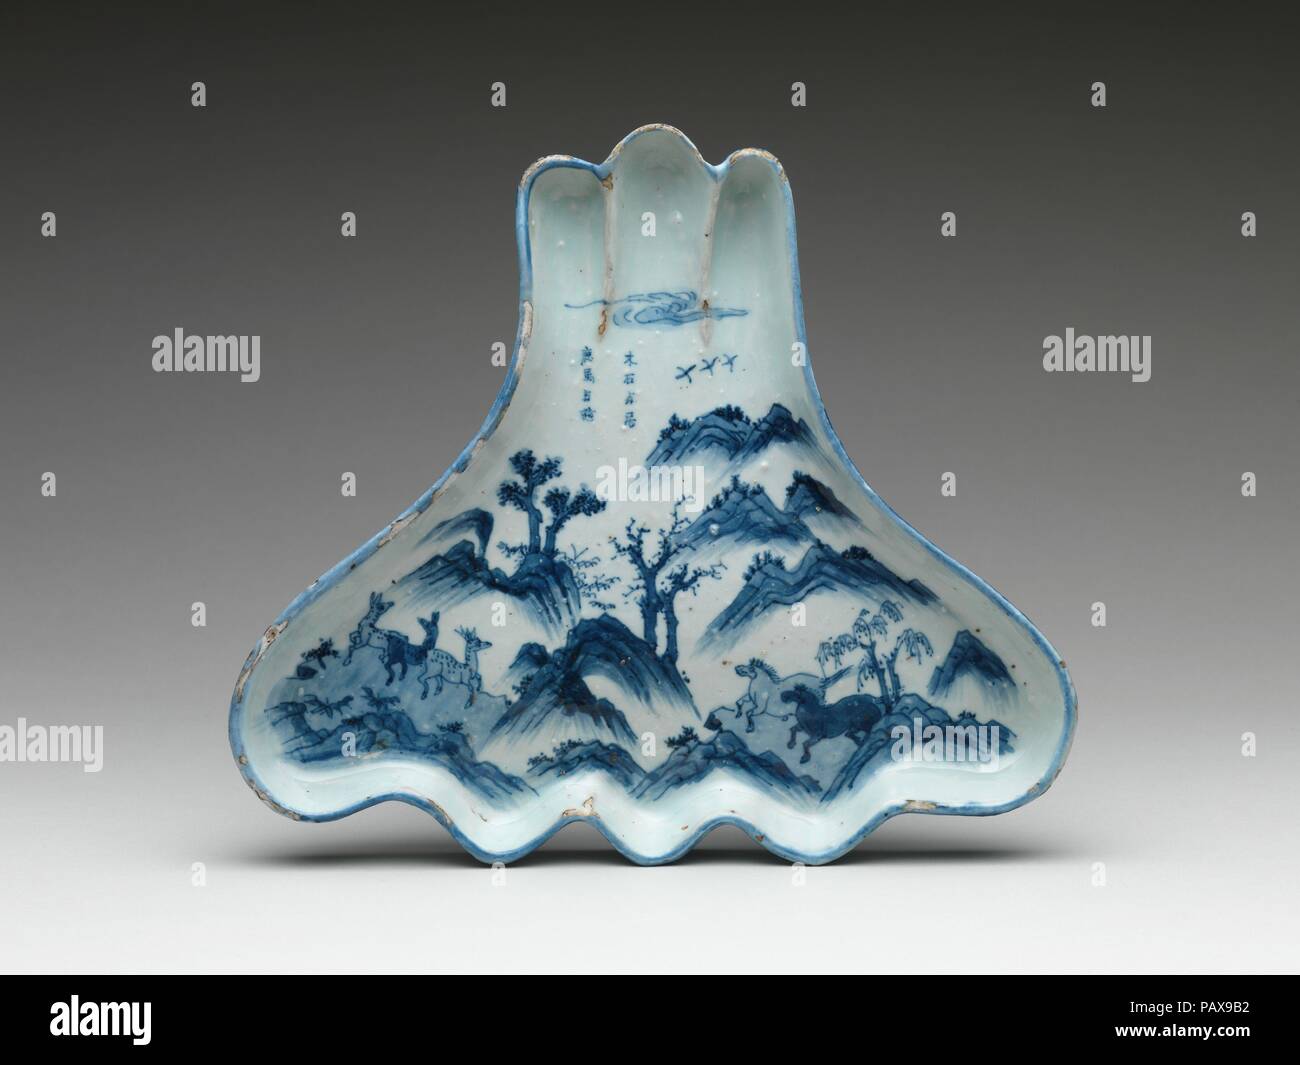 Dish in Shape of Mount Fuji with Horses and Deer. Culture: China. Dimensions: H. 2 1/16 in. (5.3 cm); W. 9 7/8 in. (25.1 cm); L. 11 1/4 in. (28.5 cm). Date: ca. 1625.  The shape of the dish, which alludes to the famed Mount Fuji, indicates that it was commissioned by a Japanese patron, most likely for a meal that accompanied the tea ceremony. The inscription, which discusses roaming with deer and horses in a landscape, is an allusion to a similar phrase in the writings of the Chinese philosopher Mencius (ca. 327-289 B.C.). Museum: Metropolitan Museum of Art, New York, USA. Stock Photo